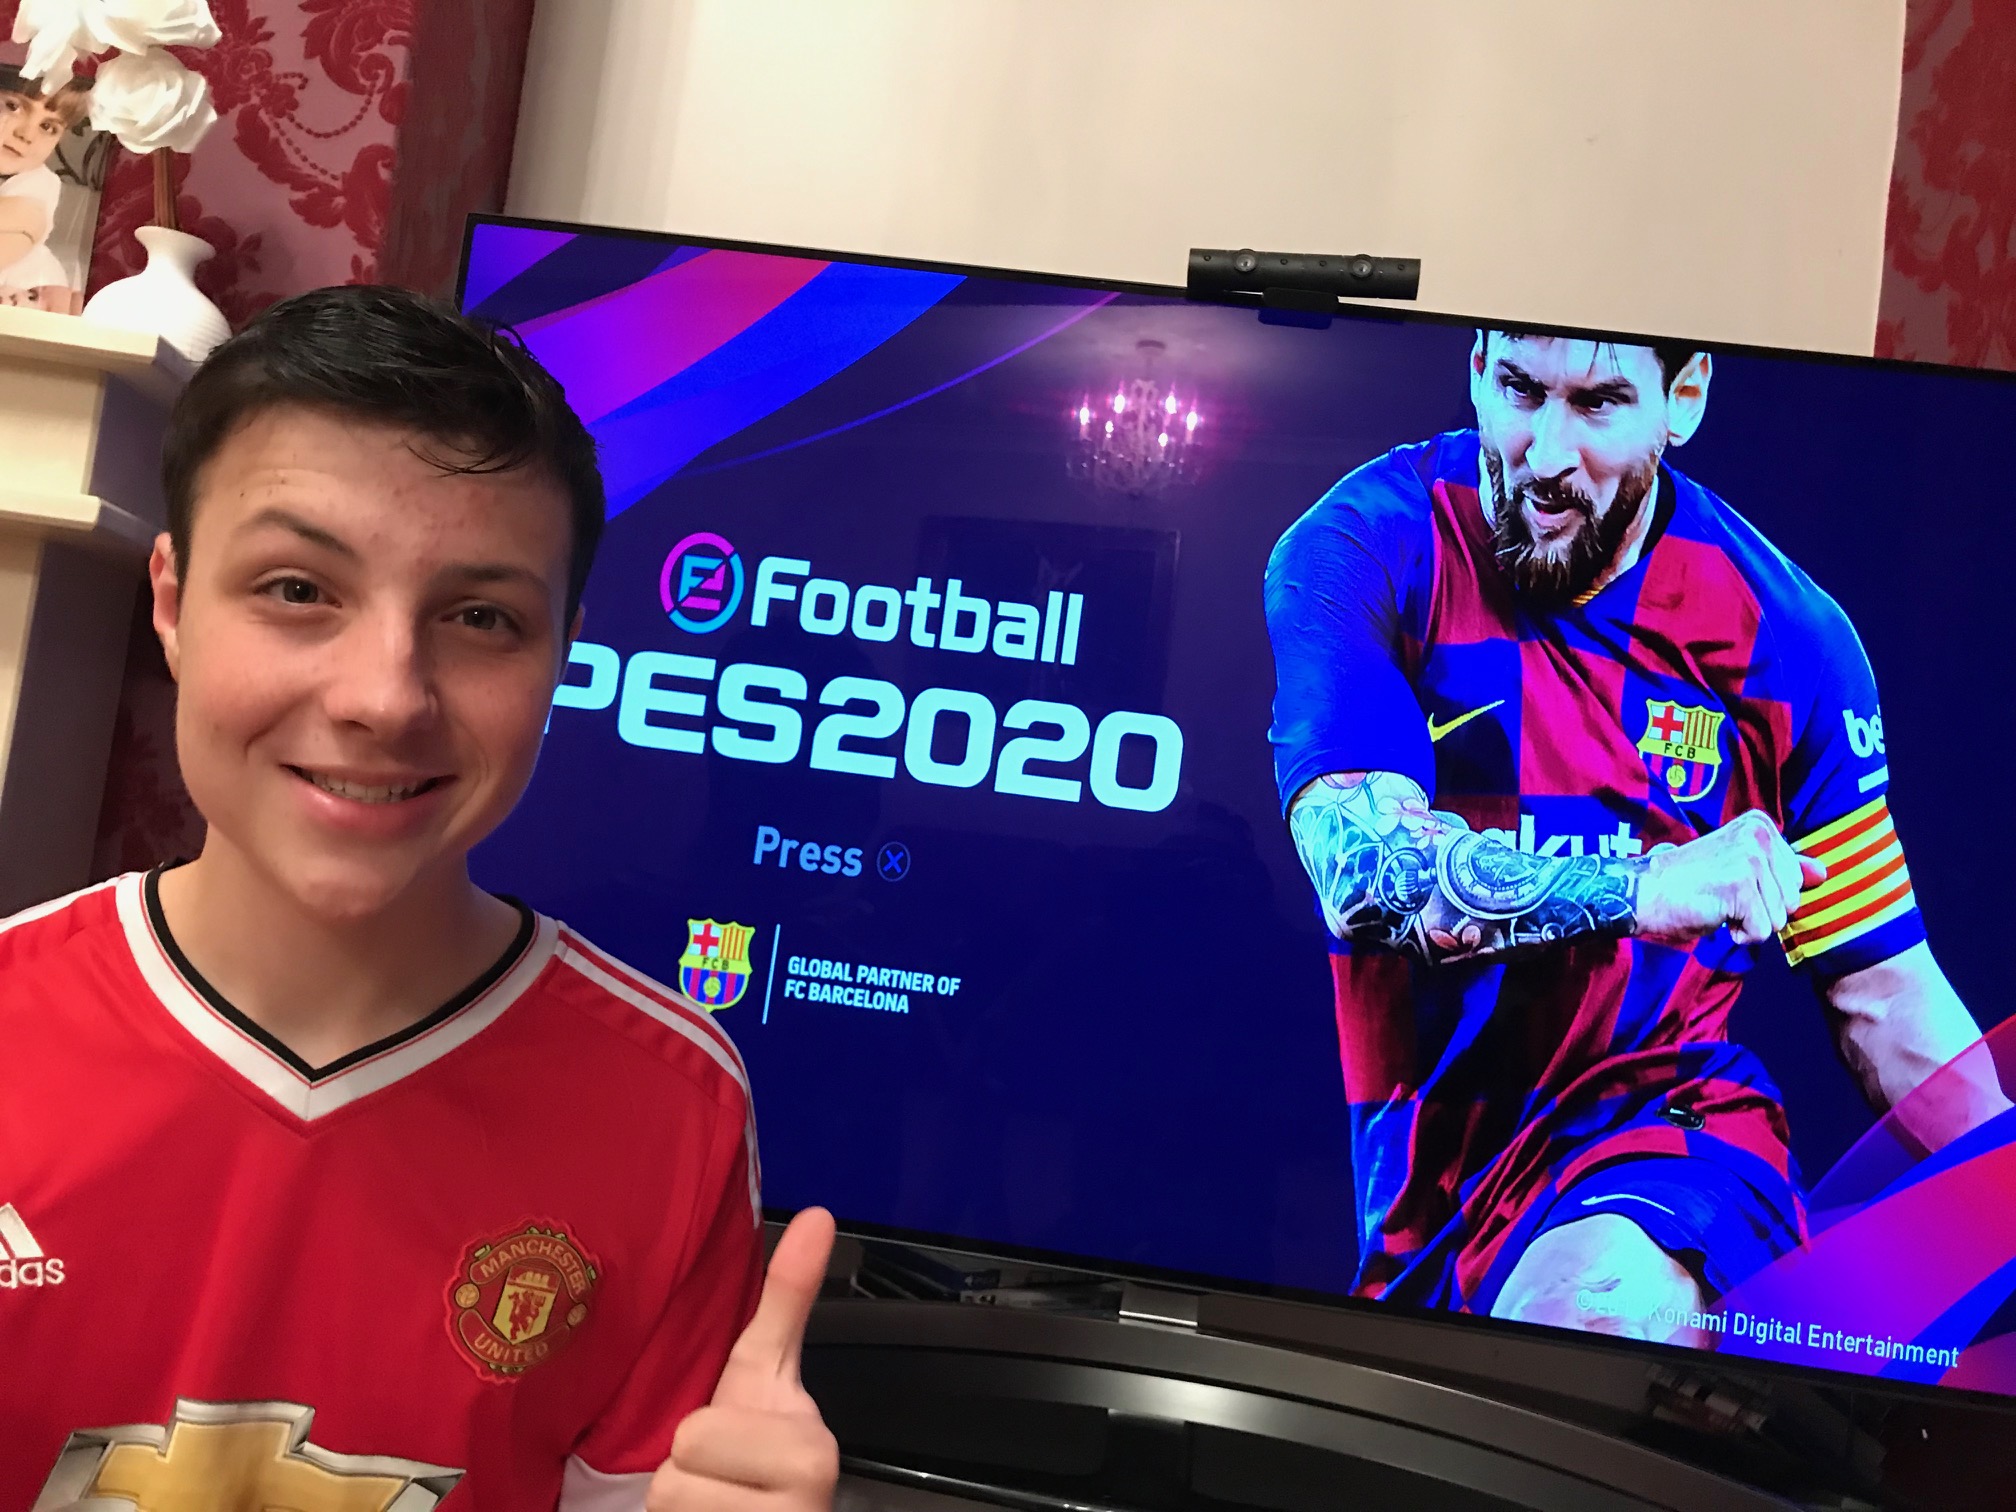 efootball pes 2020 switch